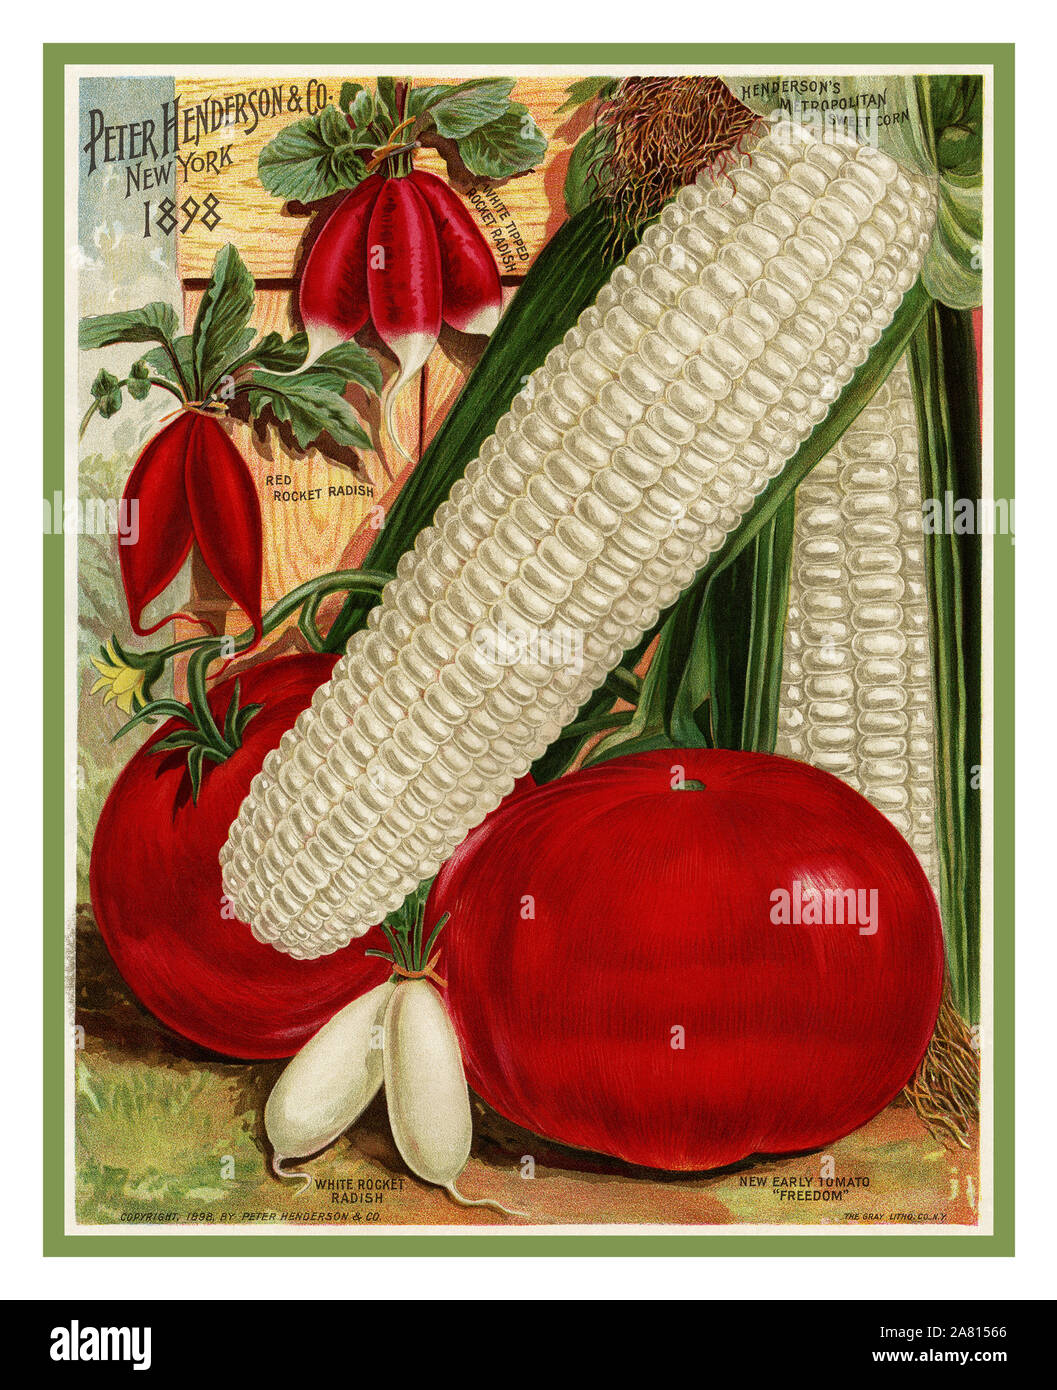 1800’s Victorian American vintage farm produce Lithograph poster featuring fresh garden vegetables display. The display includes two ears of white corn, red tomatoes and varieties of radishes. Illustration from Peter Henderson & Co. Everything for the Garden Manual, 1898. New York USA Stock Photo